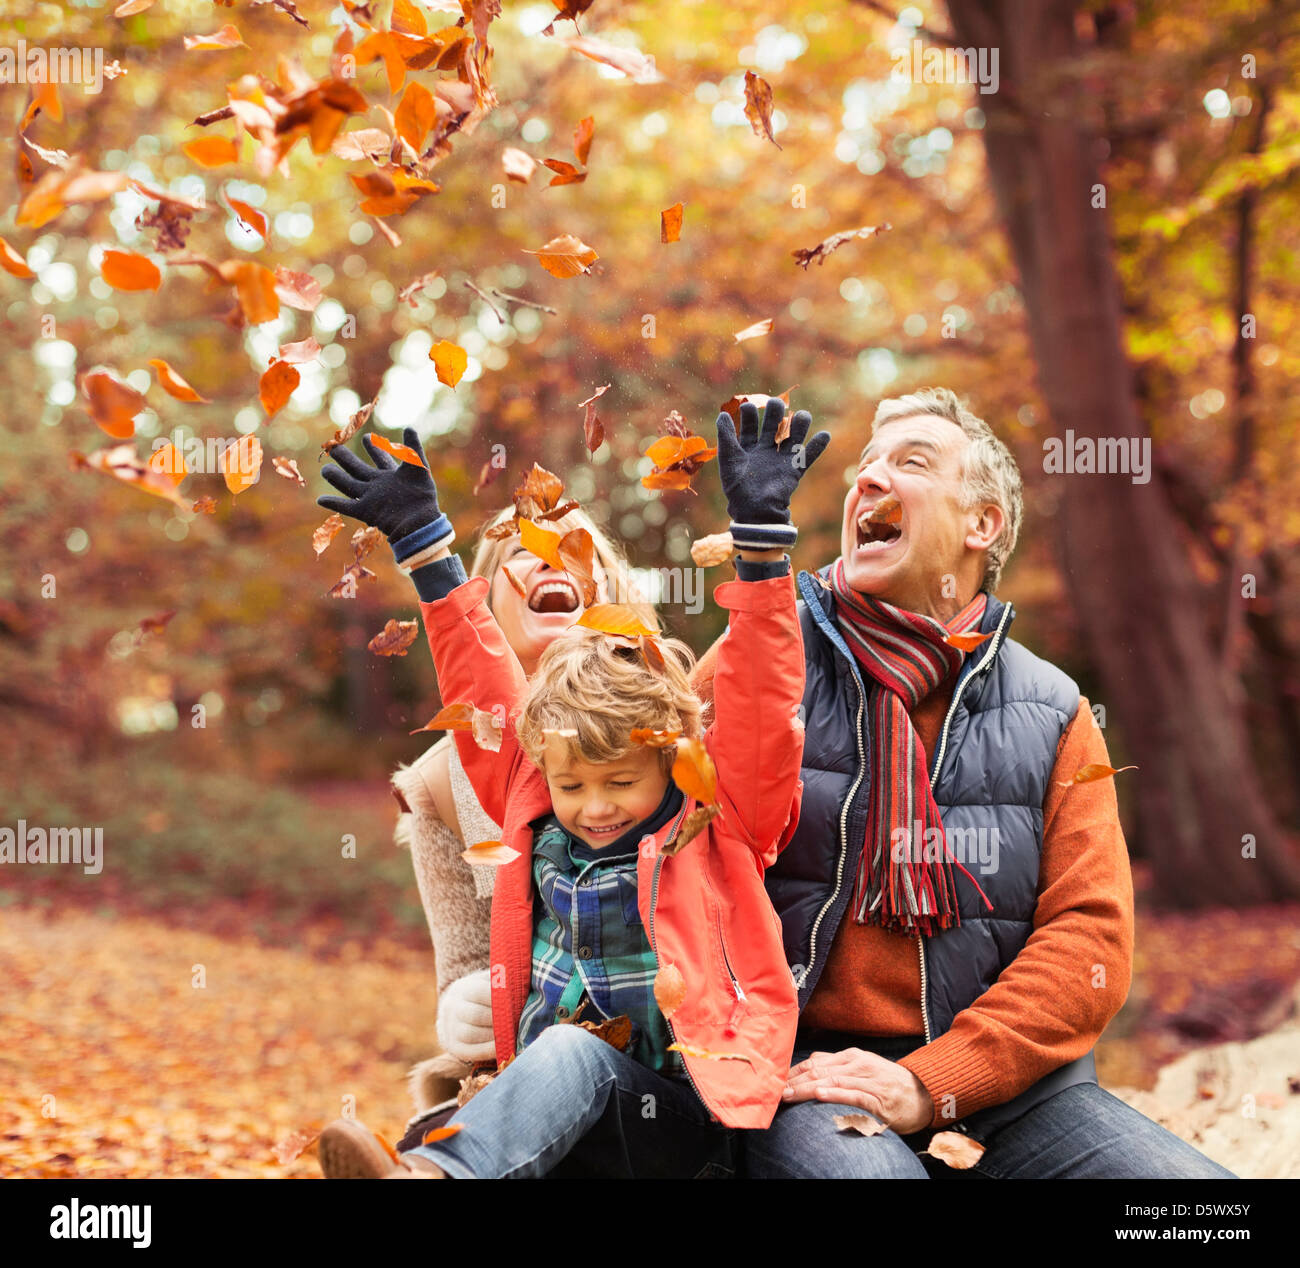 Older couple playing with grandson in autumn leaves Stock Photo